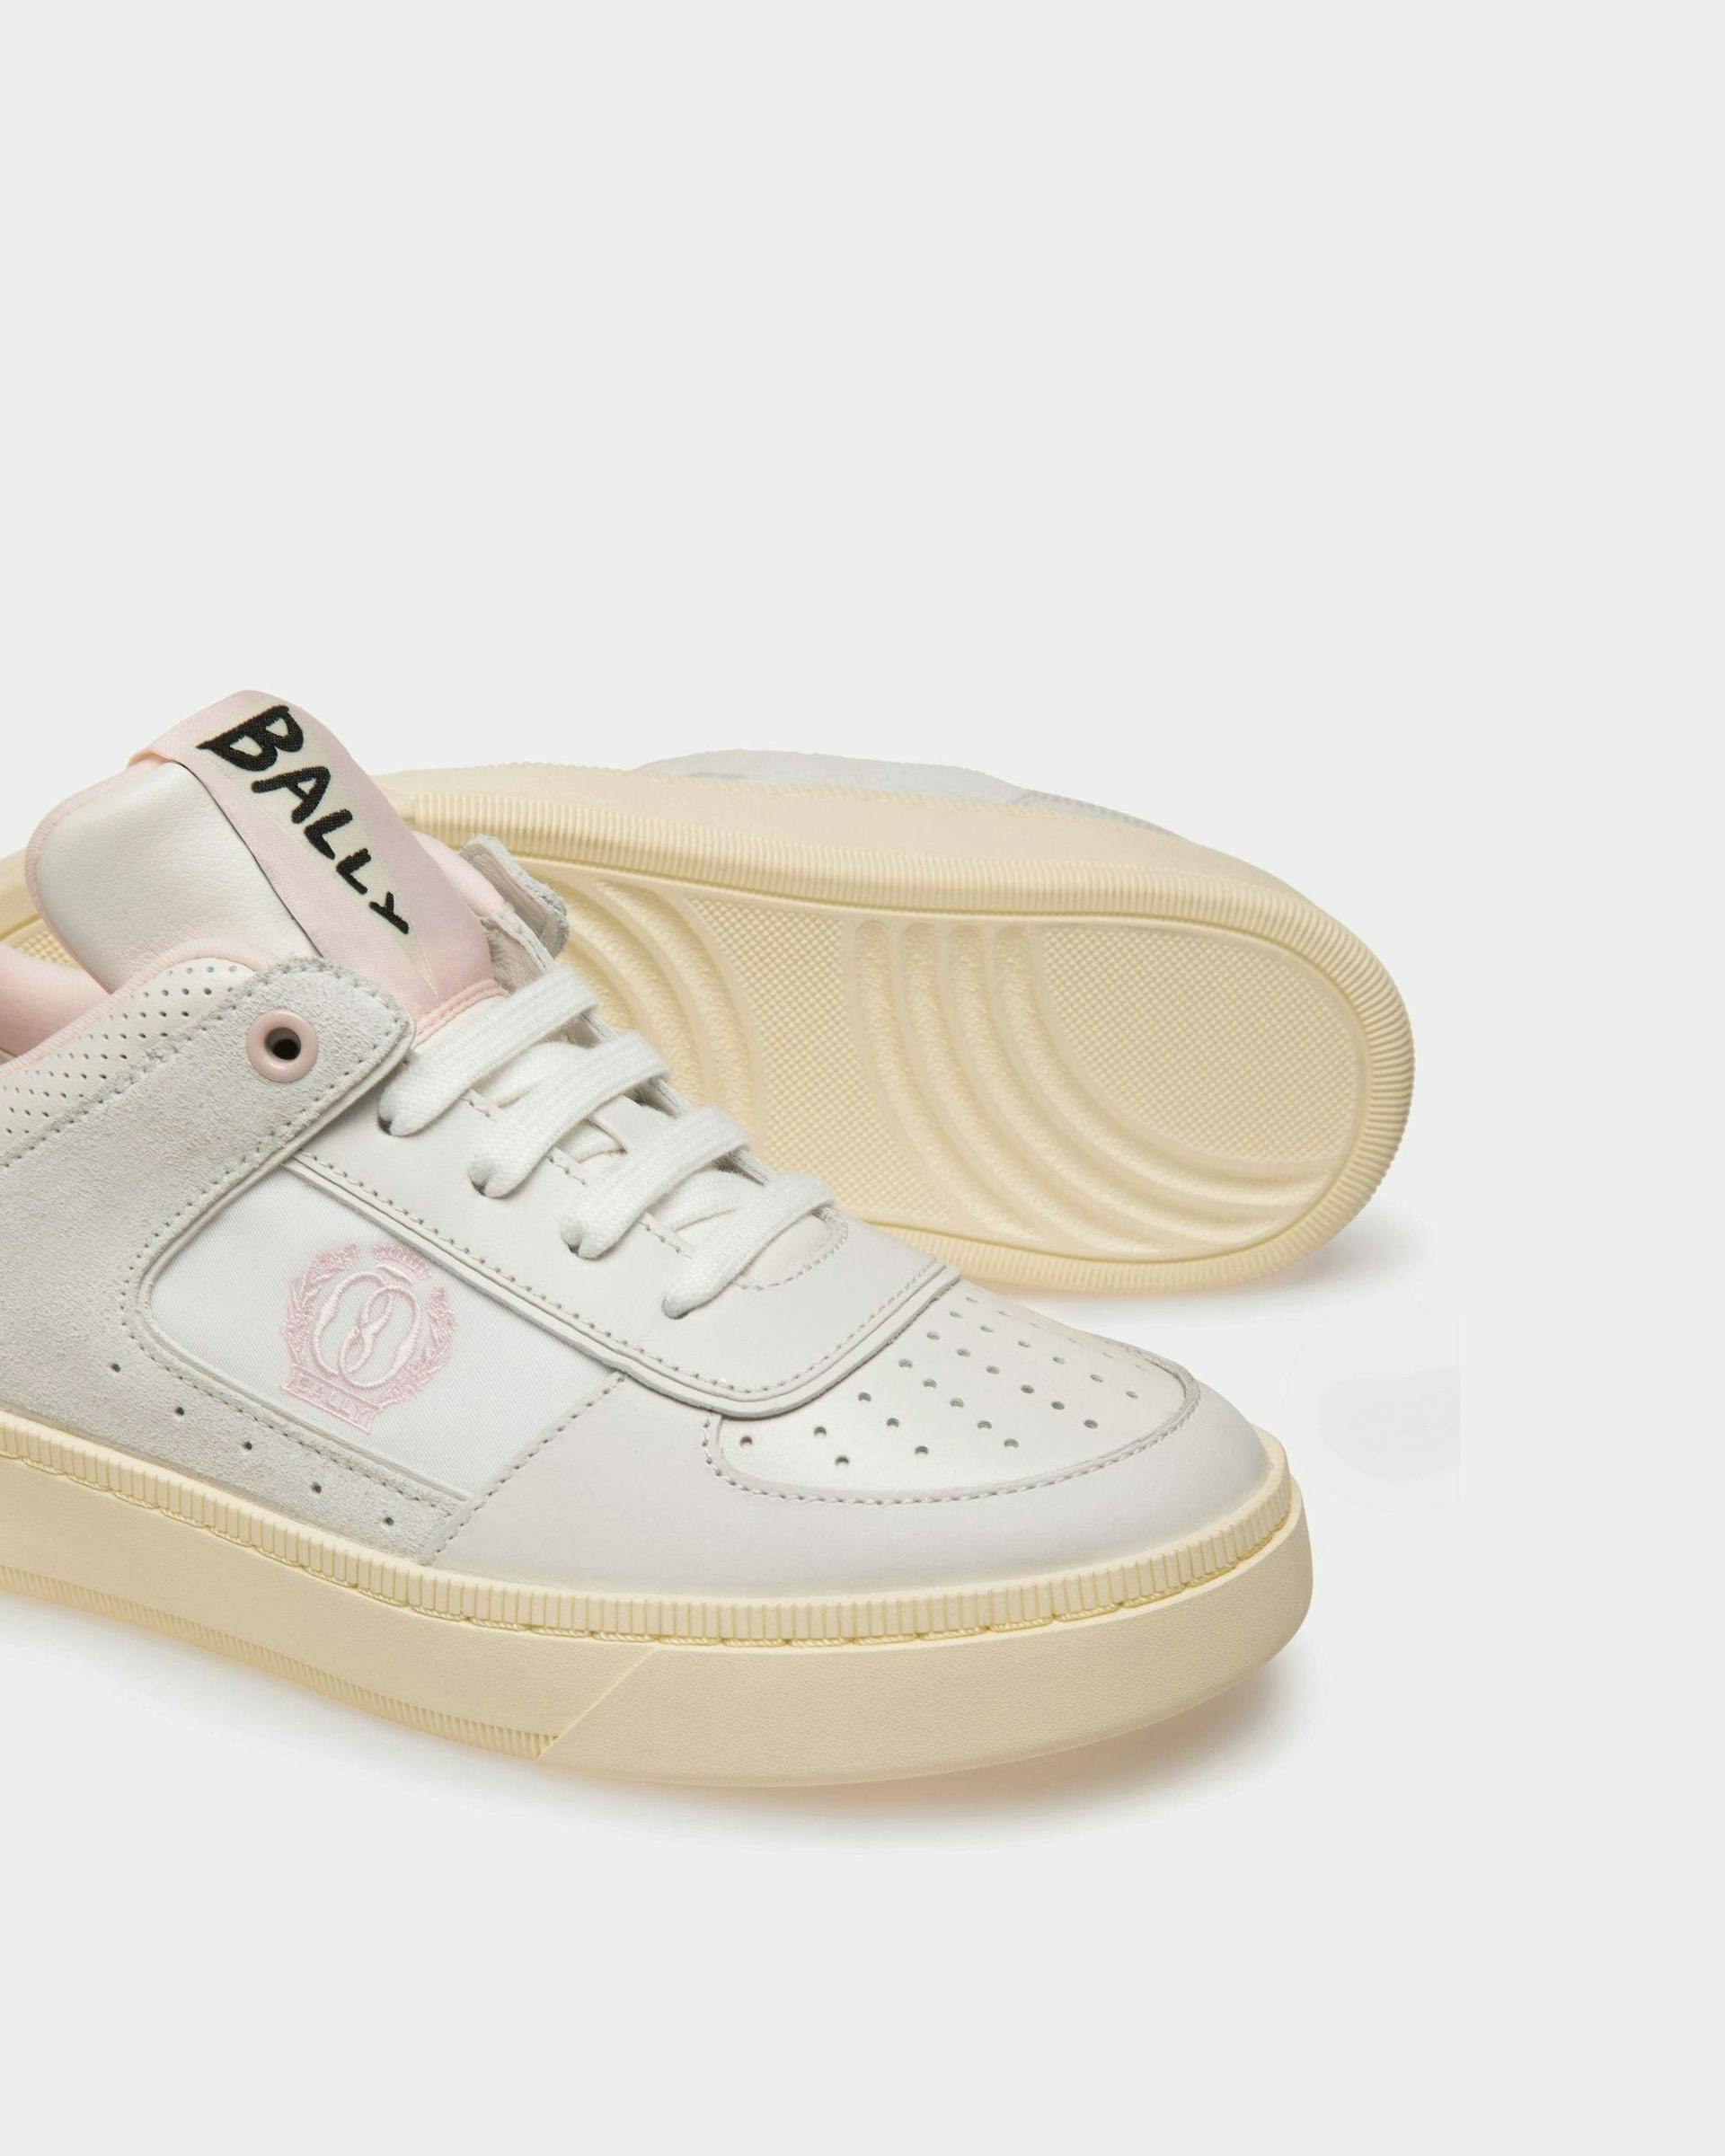 Raise Sneakers In White And Rosa Leather - Women's - Bally - 04